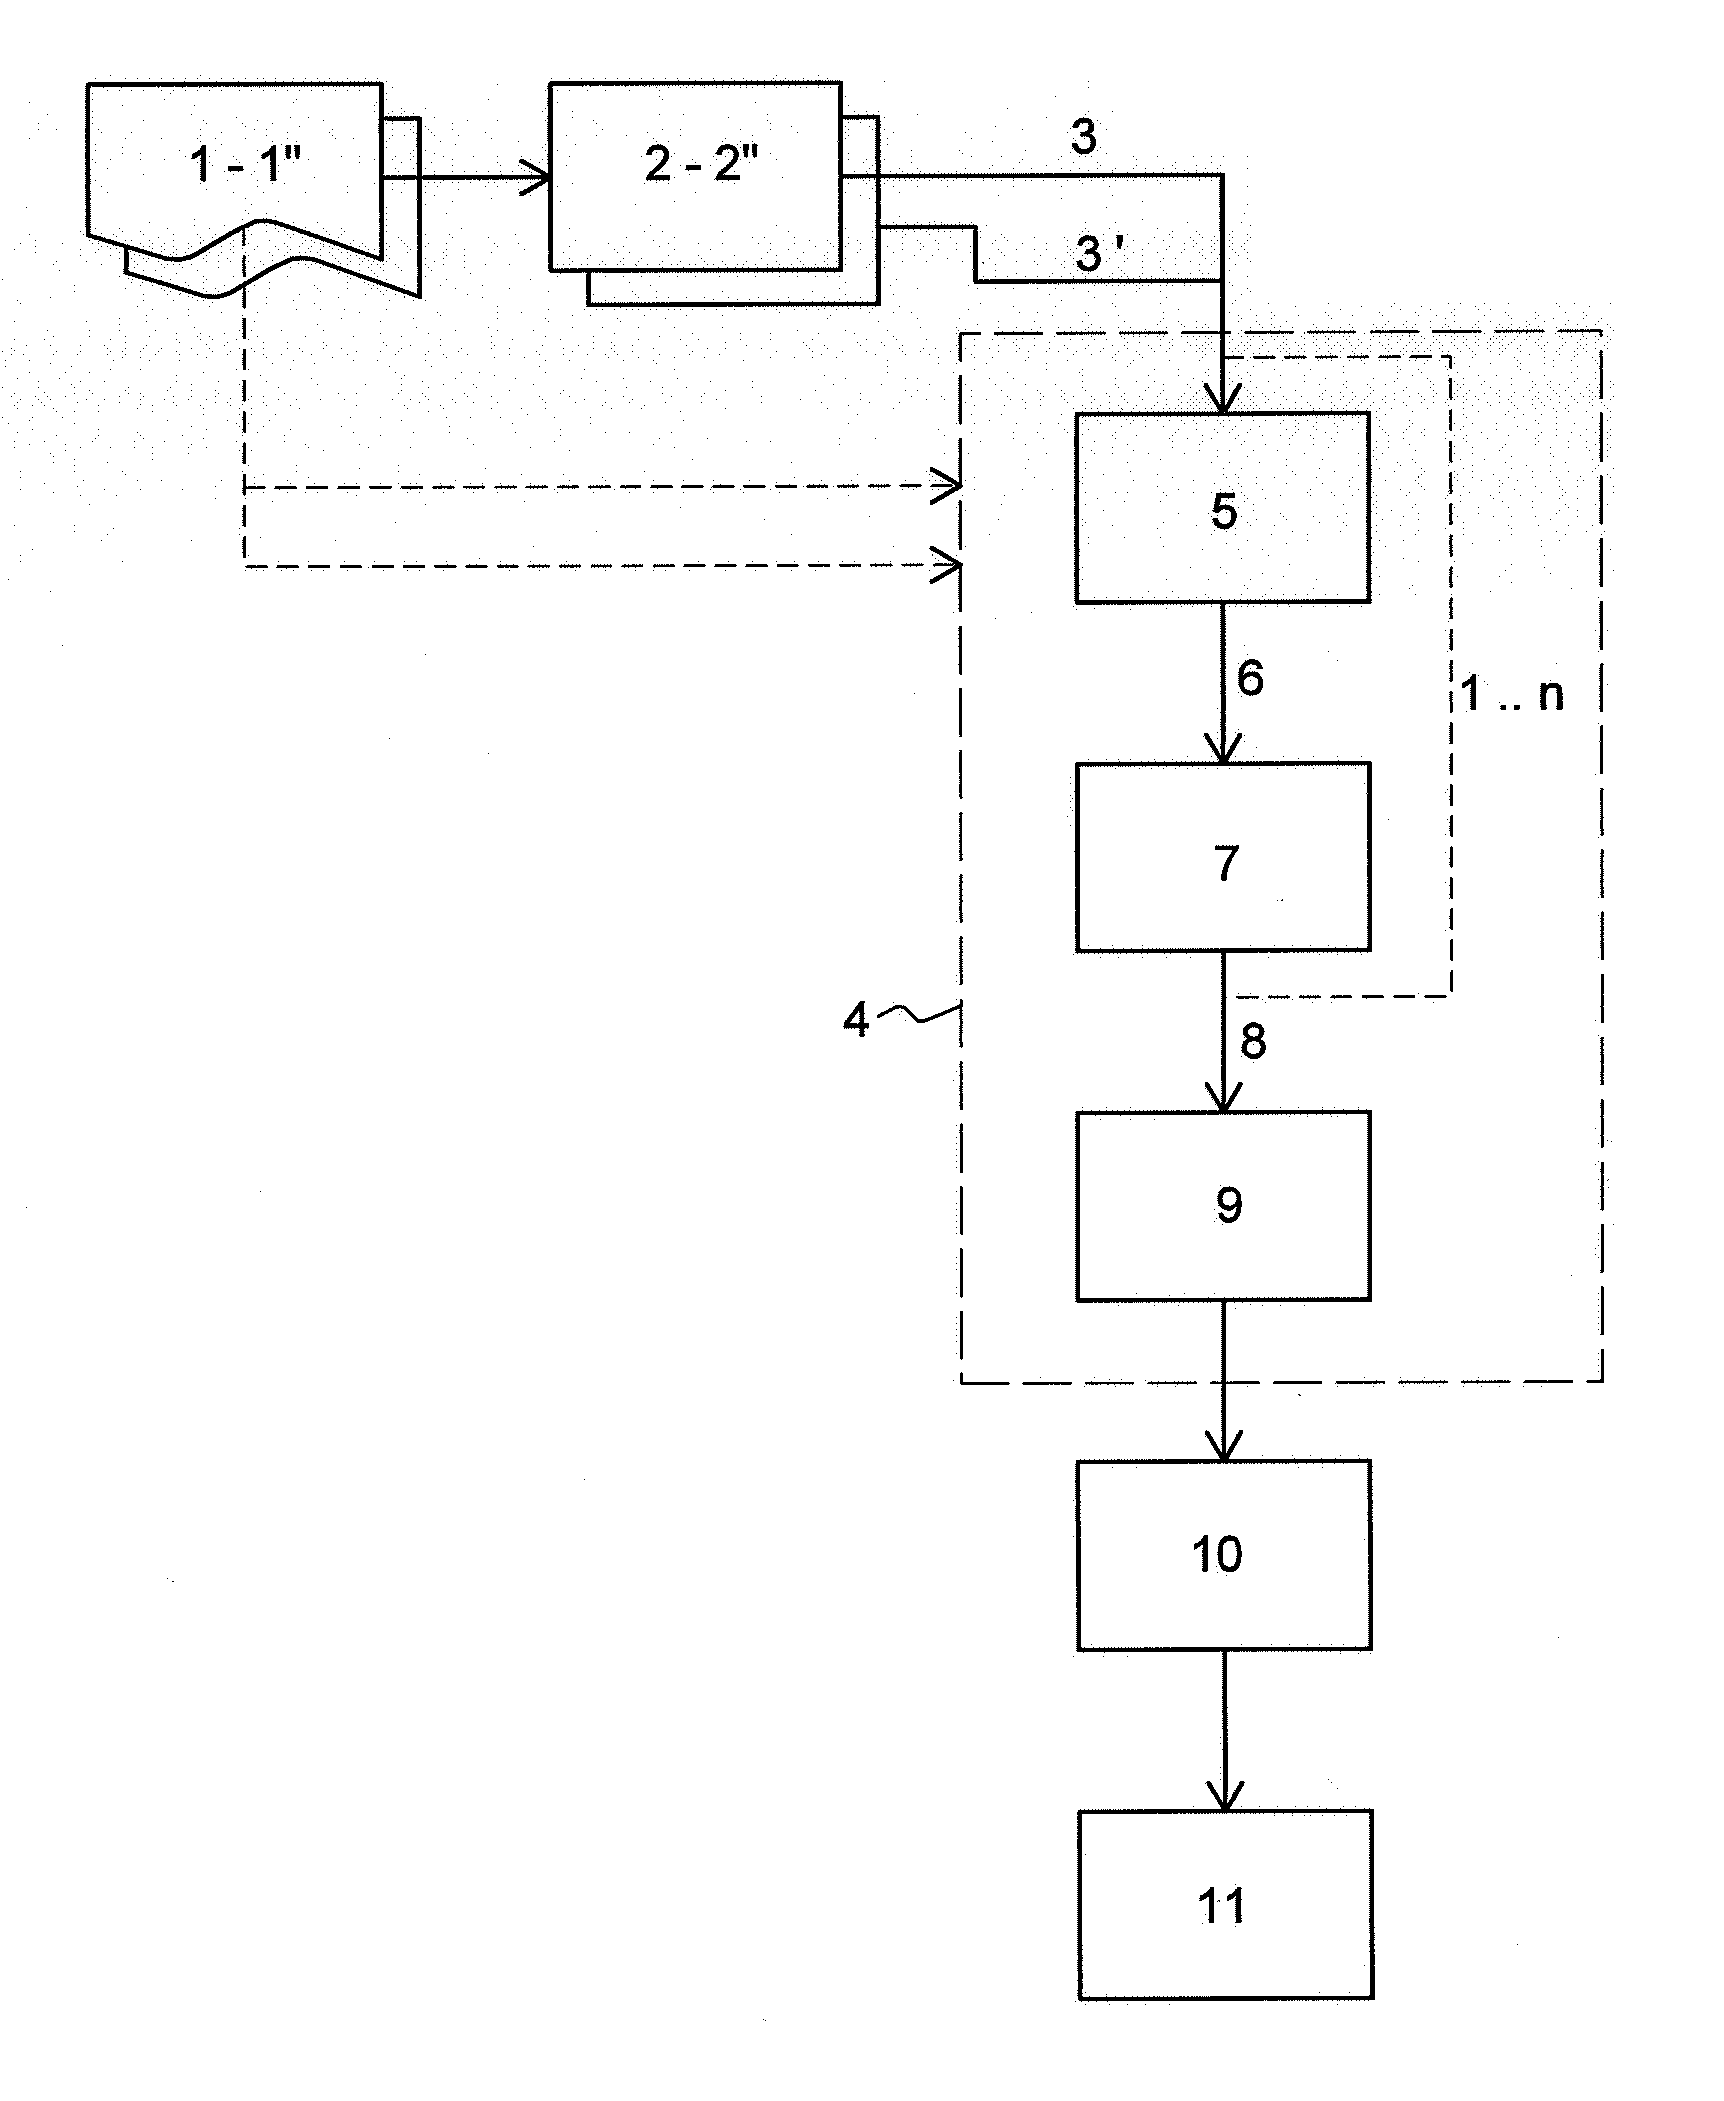 System and method for radio network planning with hsdpa analysis